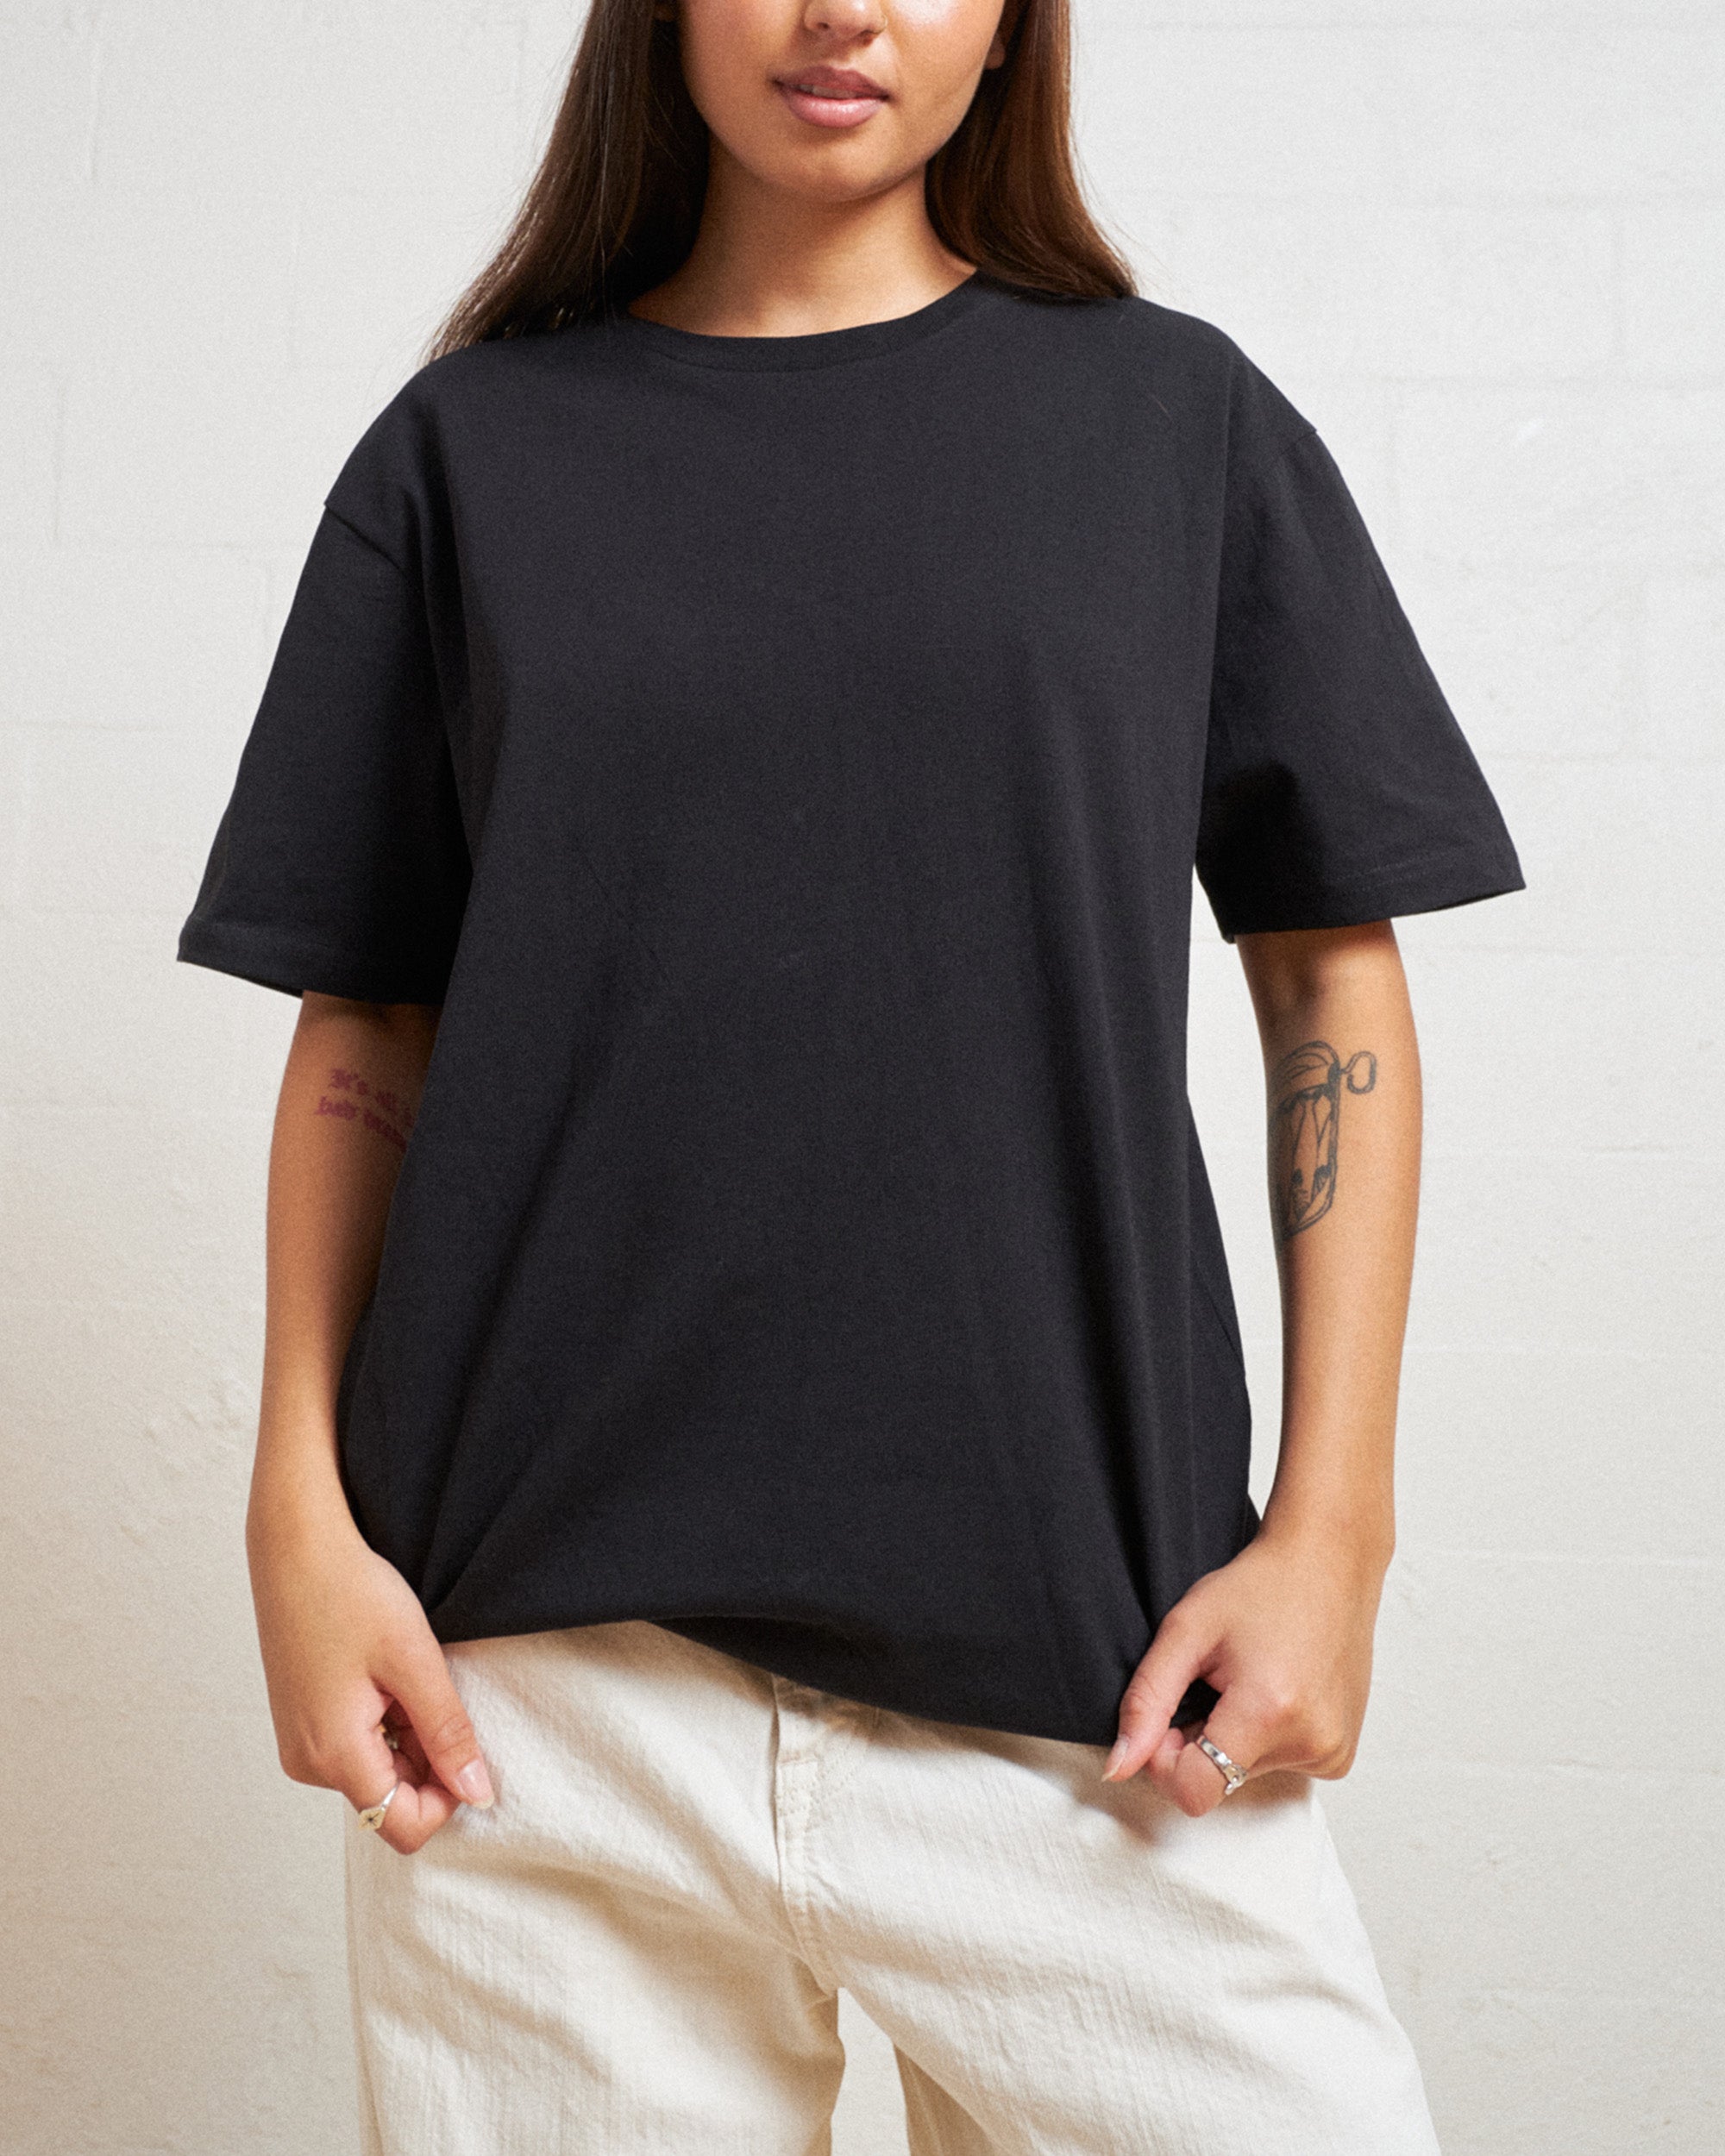 Classic Tee 5-Pack: Black, Navy, White, Natural, Grey